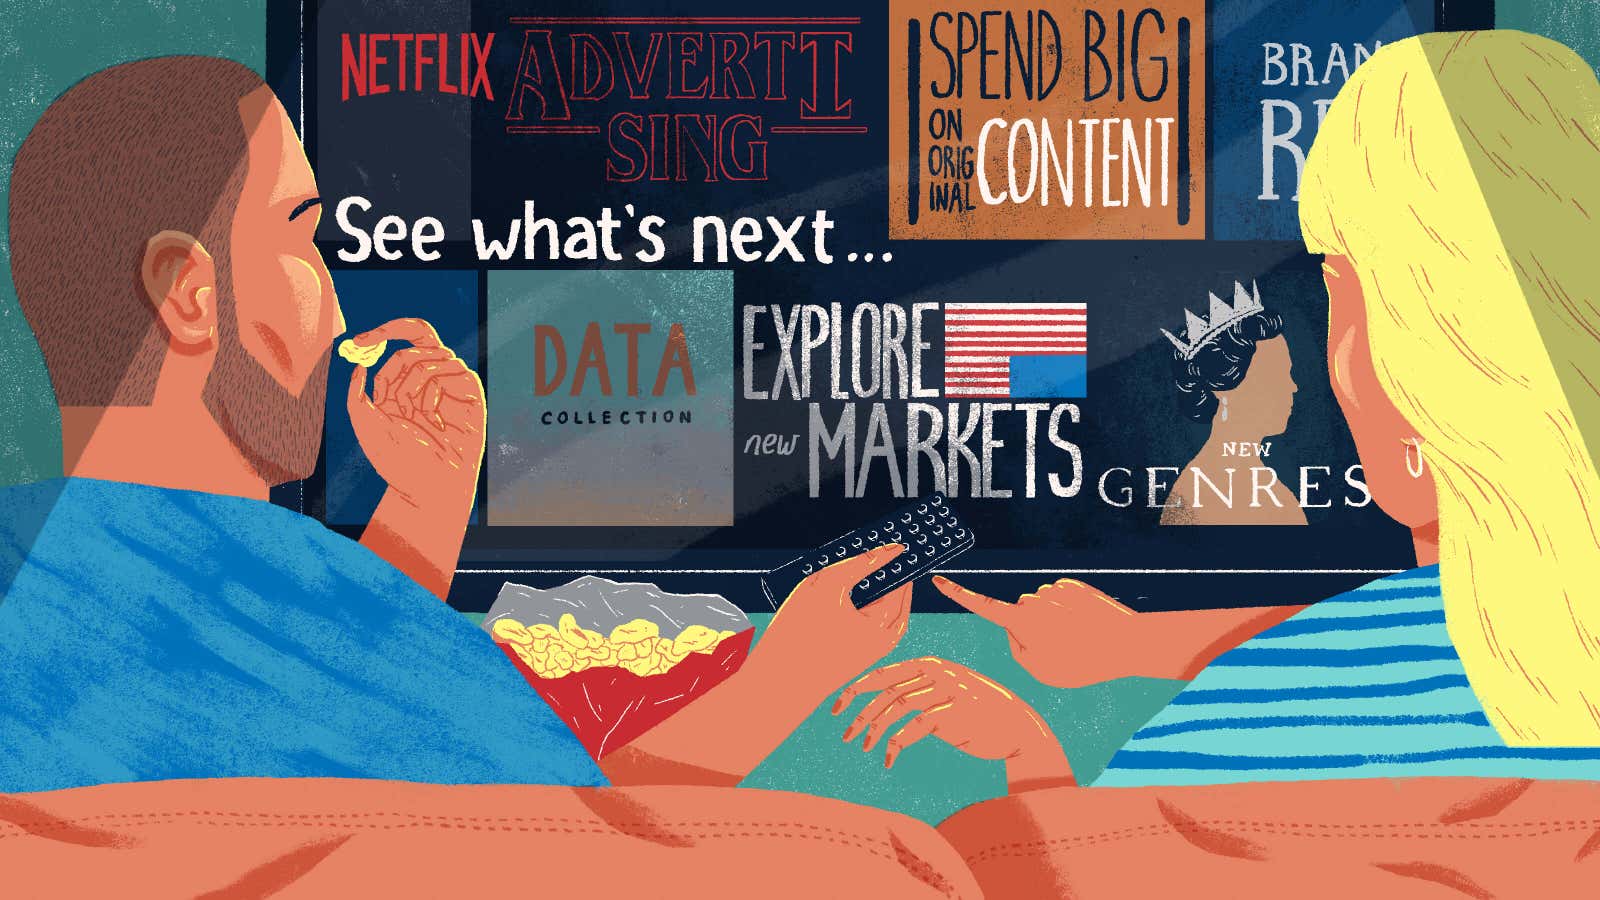 Netflix has no choice but to disrupt the entertainment business, again